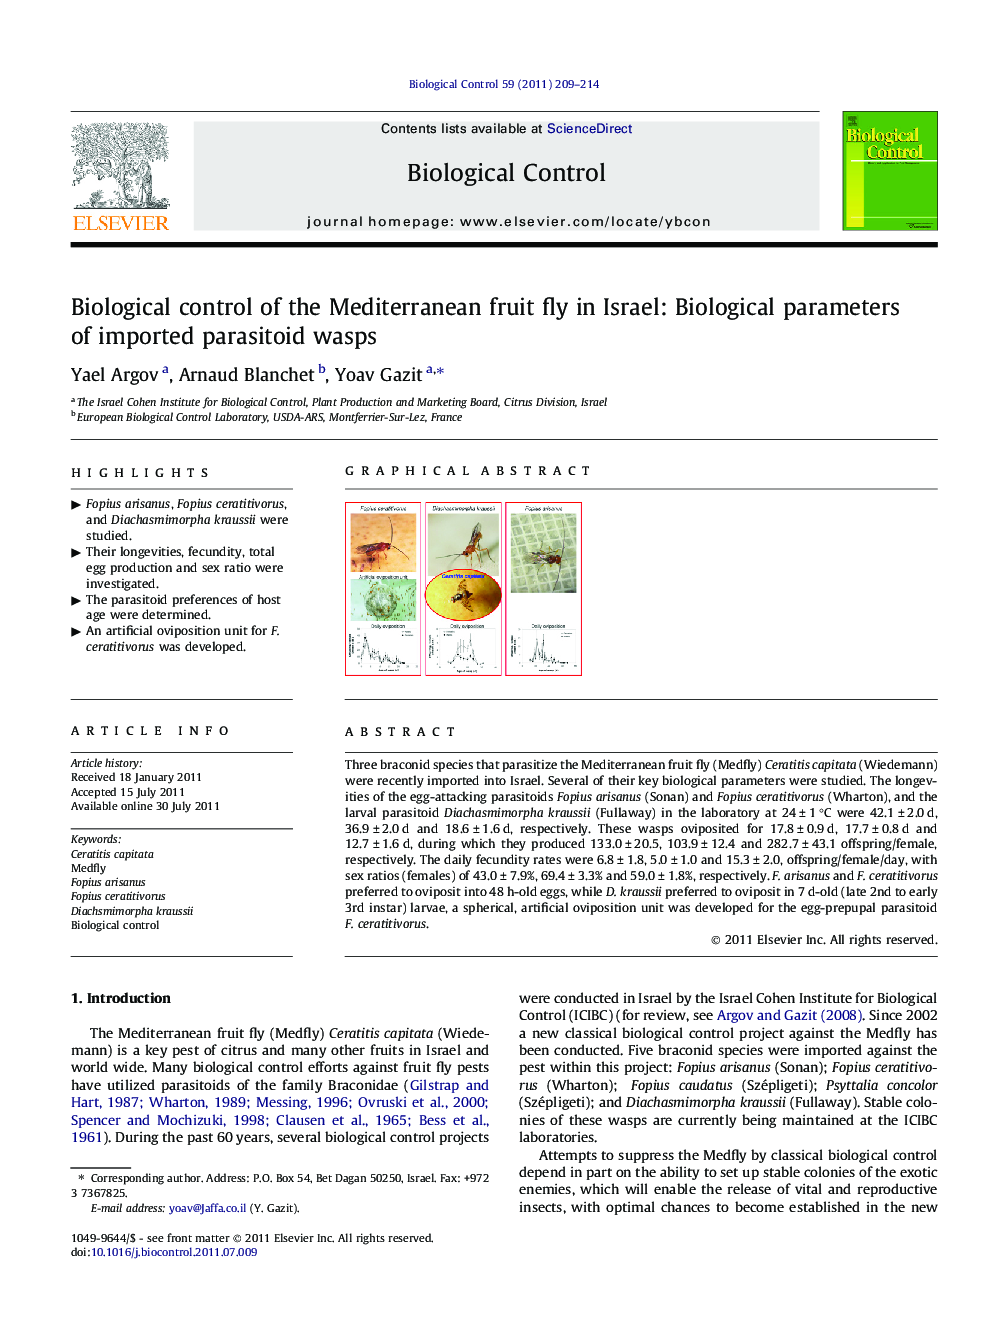 Biological control of the Mediterranean fruit fly in Israel: Biological parameters of imported parasitoid wasps